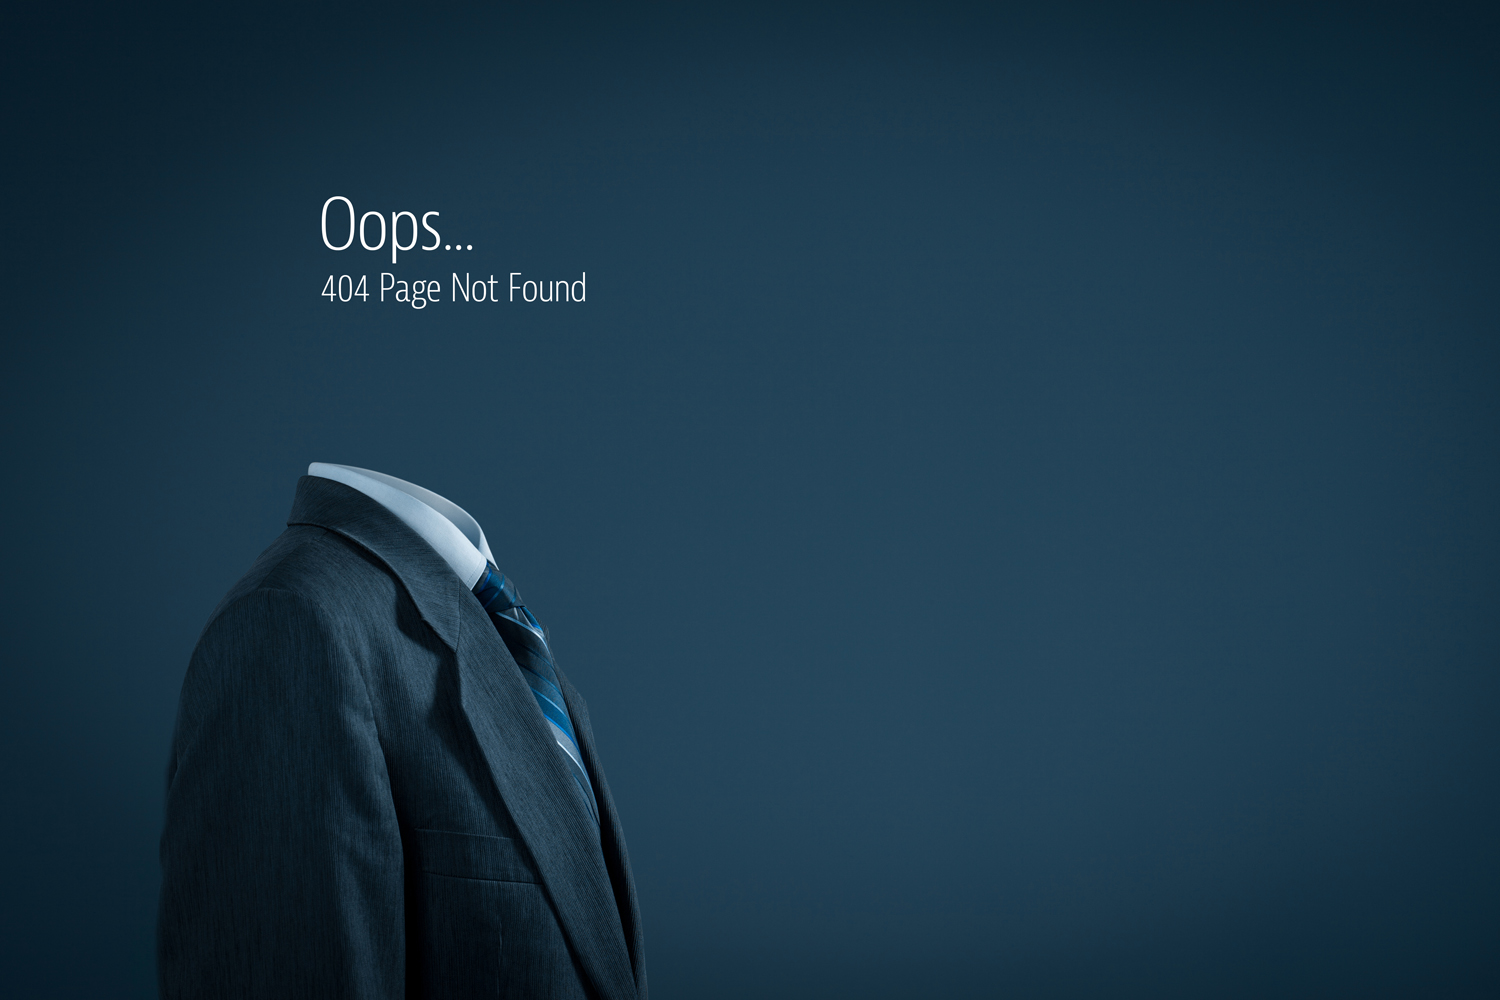 Http 404 error not found page template concept. Error page 404 message and businessperson leaving page.